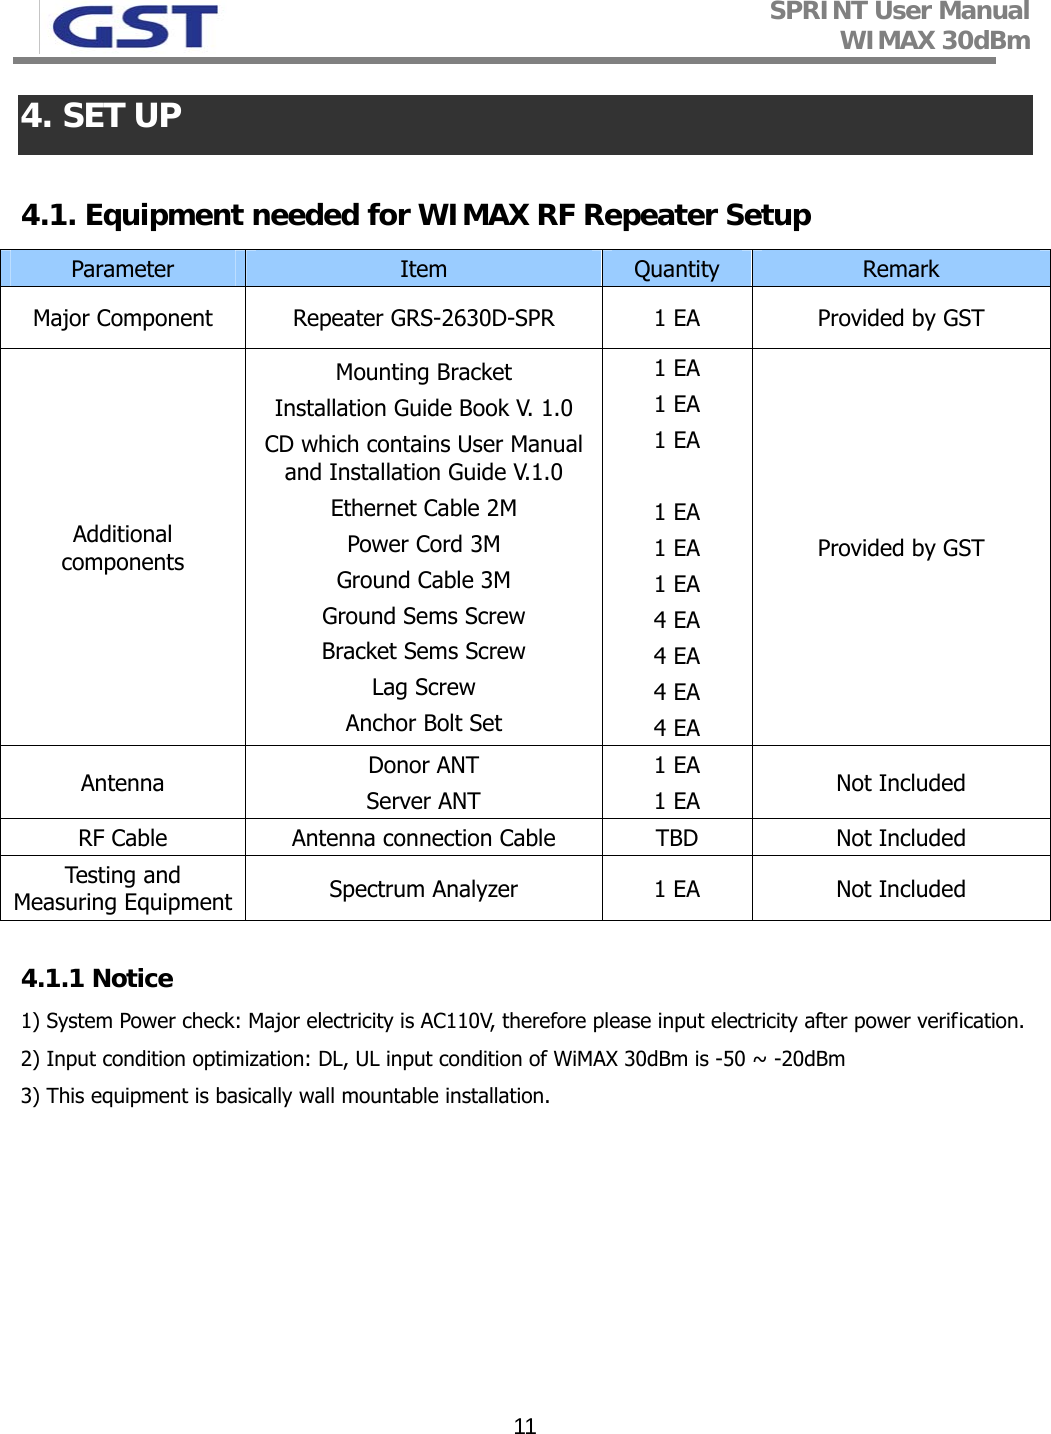 SPRINT User Manual WIMAX 30dBm   114. SET UP  4.1. Equipment needed for WIMAX RF Repeater Setup  Parameter  Item  Quantity  Remark Major Component  Repeater GRS-2630D-SPR  1 EA  Provided by GST Additional  components Mounting Bracket Installation Guide Book V. 1.0 CD which contains User Manual  and Installation Guide V.1.0 Ethernet Cable 2M Power Cord 3M  Ground Cable 3M Ground Sems Screw Bracket Sems Screw Lag Screw Anchor Bolt Set  1 EA 1 EA 1 EA  1 EA 1 EA 1 EA 4 EA 4 EA 4 EA 4 EA Provided by GST Antenna  Donor ANT Server ANT 1 EA 1 EA  Not Included RF Cable  Antenna connection Cable  TBD  Not Included Testing an d  Measuring Equipment  Spectrum Analyzer  1 EA  Not Included  4.1.1 Notice 1) System Power check: Major electricity is AC110V, therefore please input electricity after power verification.  2) Input condition optimization: DL, UL input condition of WiMAX 30dBm is -50 ~ -20dBm 3) This equipment is basically wall mountable installation.     